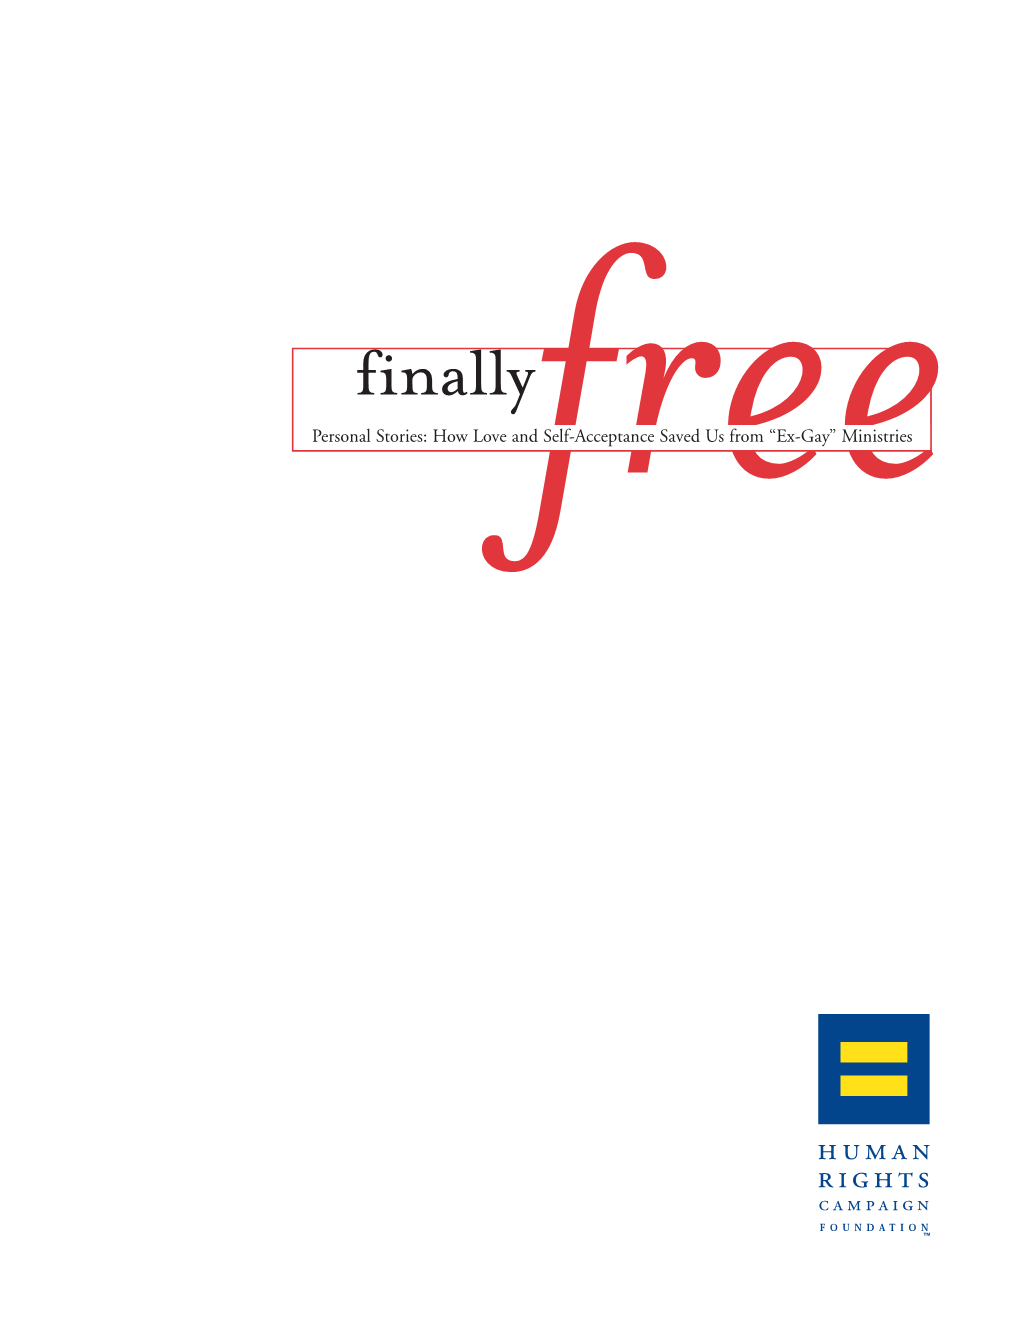 Finally Free” Is Dedicated to Stuart Mathis, a Gay Mormon from San Francisco Who Commit- Ted Suicide Because He Was Unable to Change His Sexual Orientation